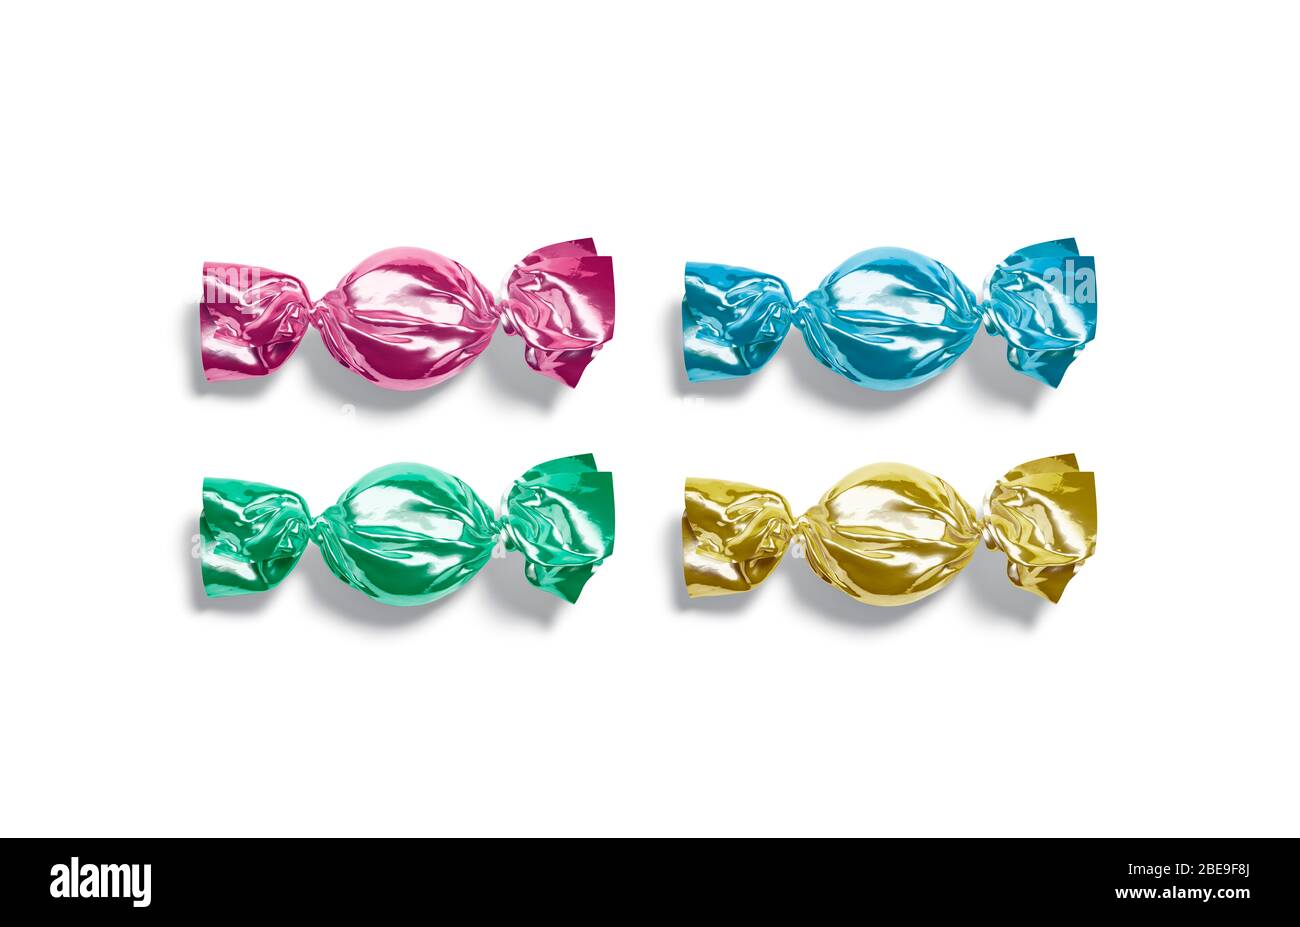 Blank colored hard candy foil wrapper mockup, top view Stock Photo